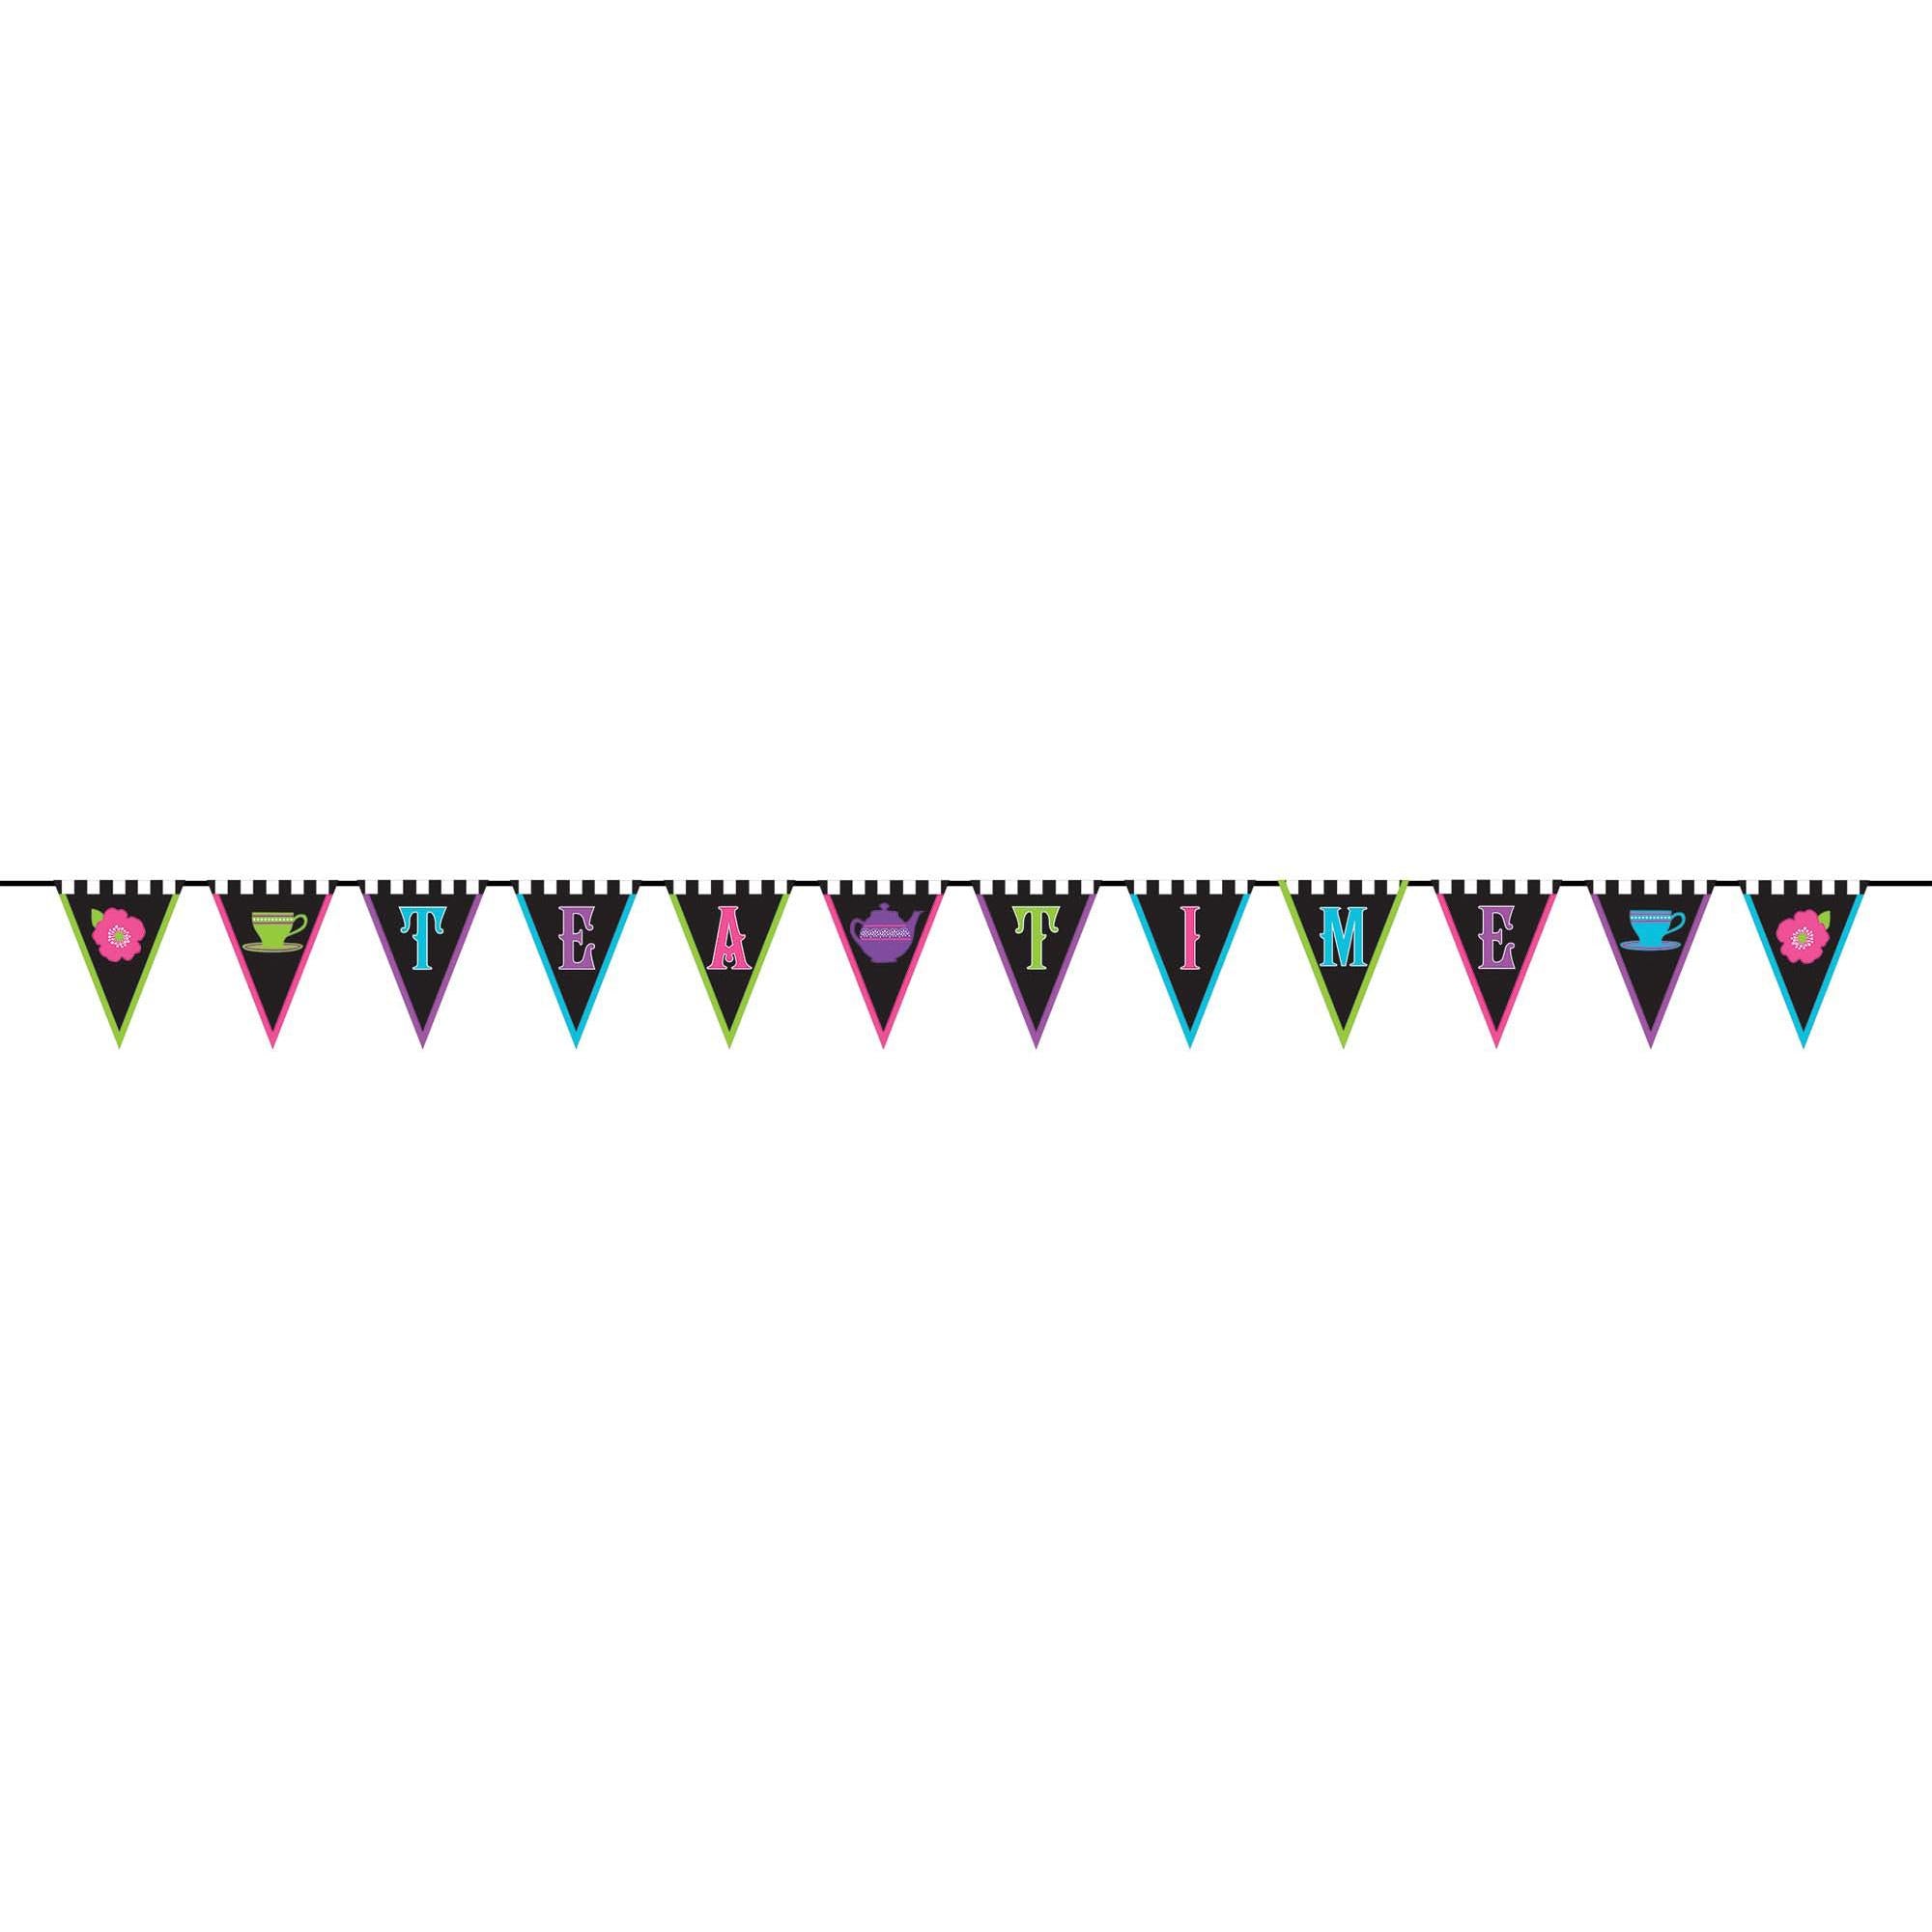 Mad Tea Party Fabric Pennant Banner Decorations - Party Centre - Party Centre